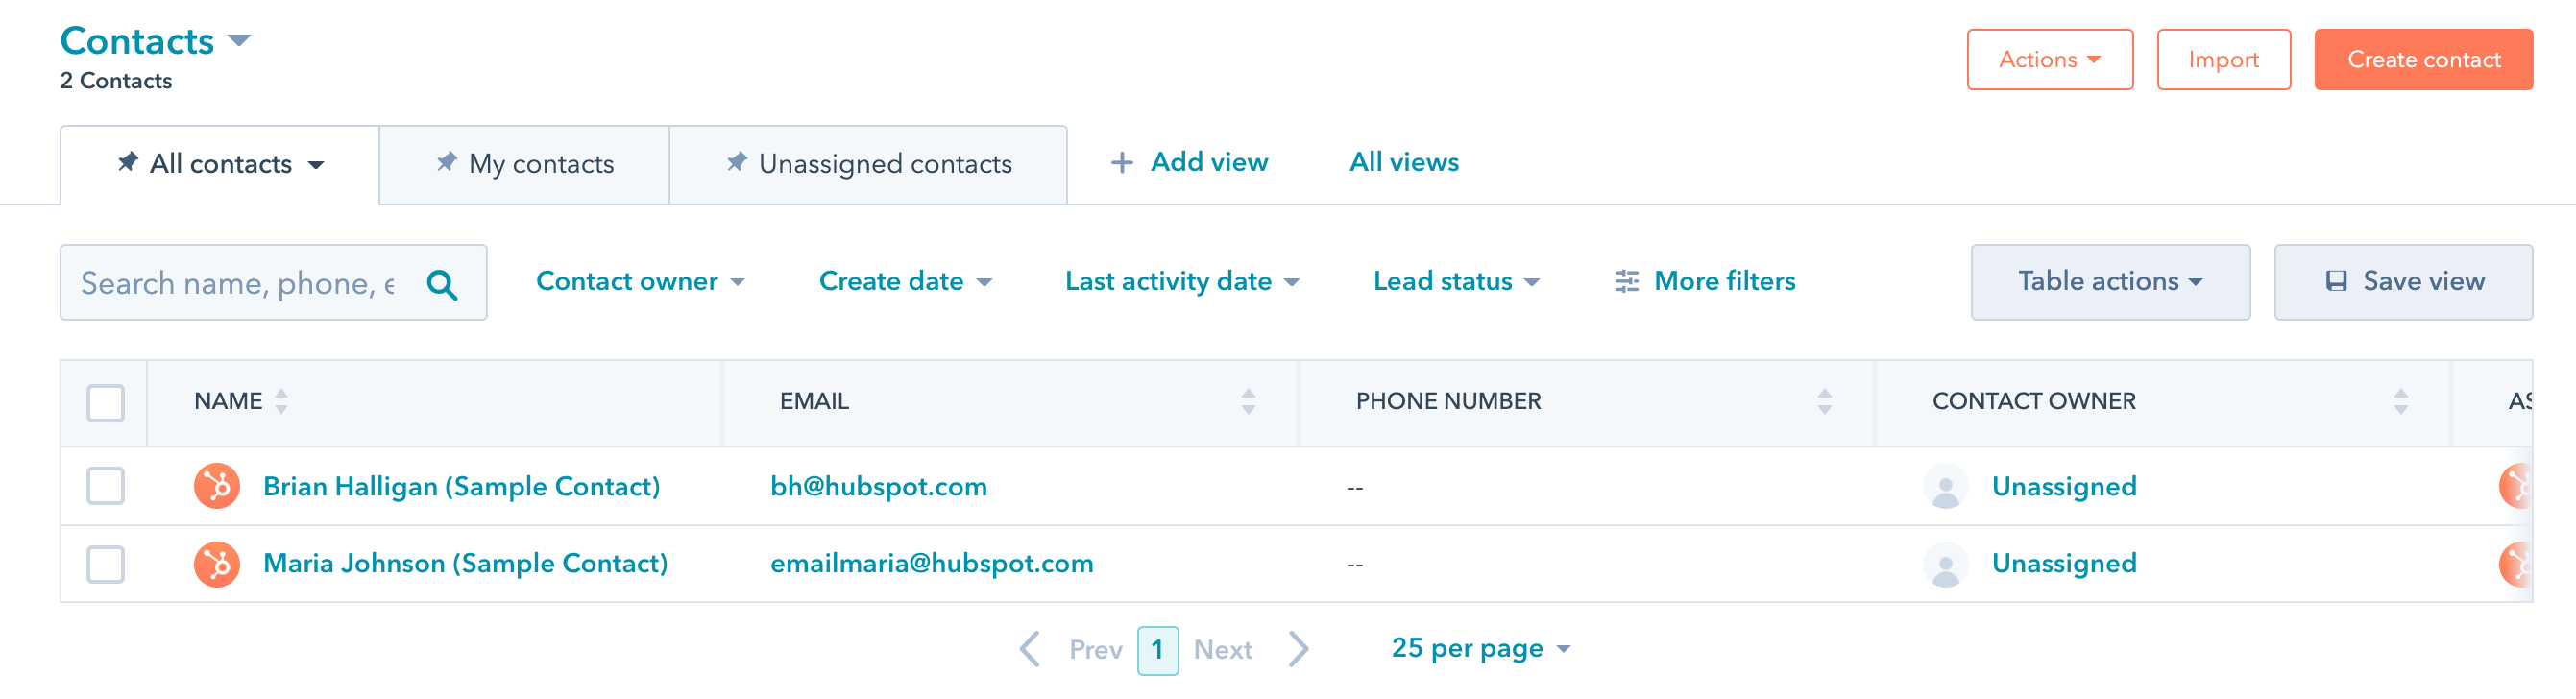 HubSpot_View_Contacts.png